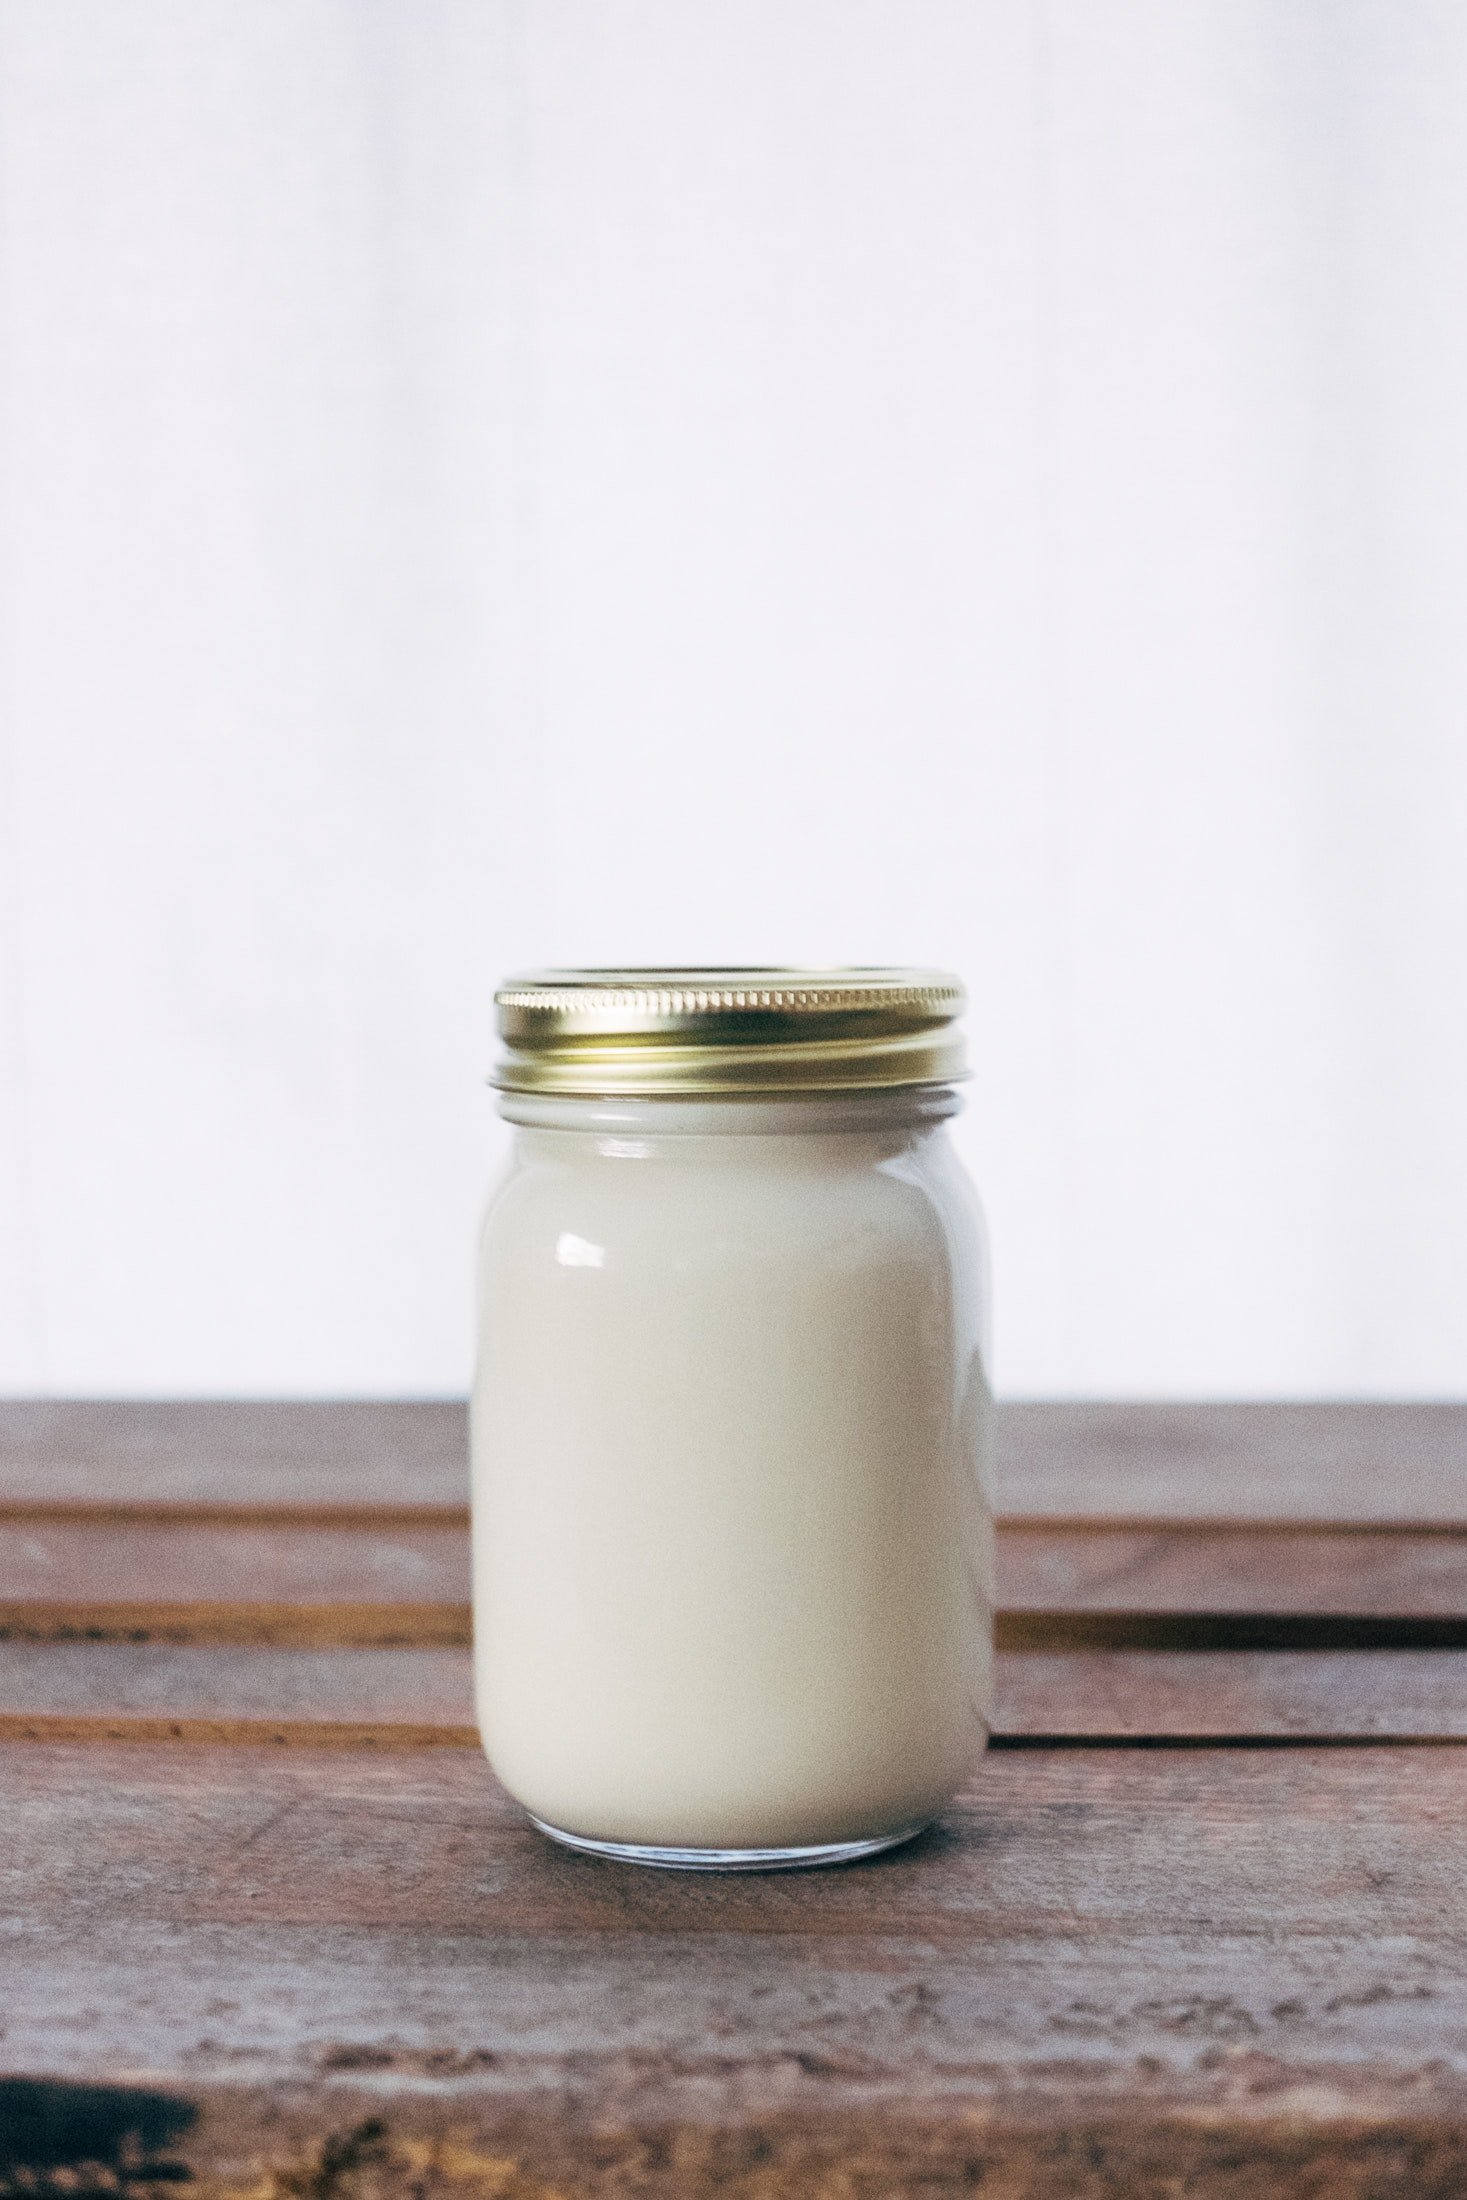 Pictured - A picture of a clear jar on the brown table | Source: Pexels 